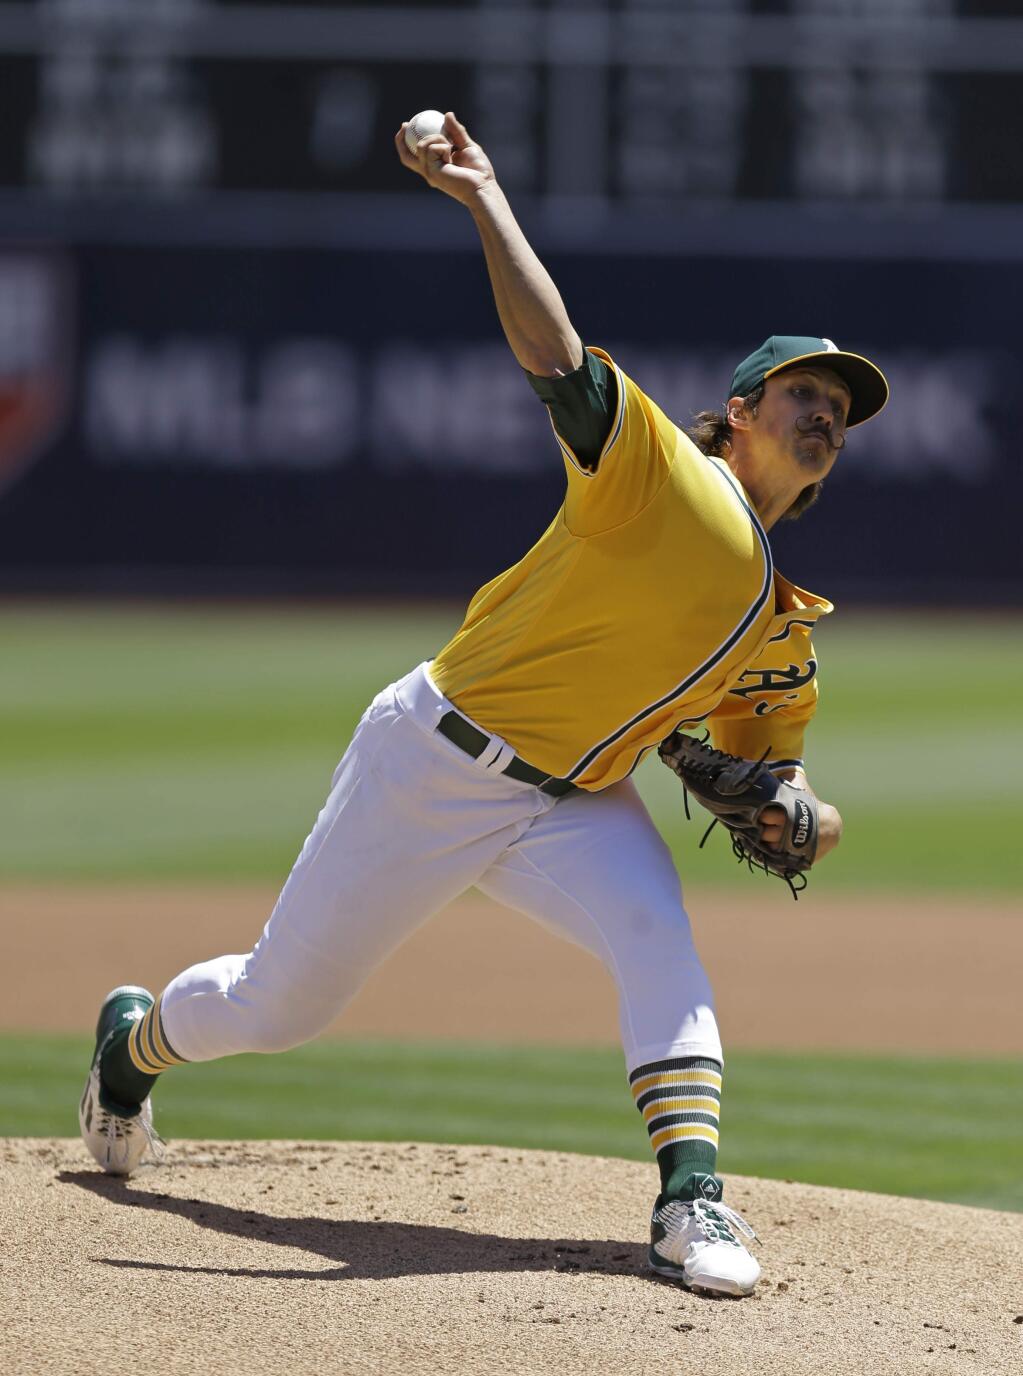 Oakland Athletics pitcher Daniel Mengden works against the Milwaukee Brewers in the first inning of a baseball game Wednesday, June 22, 2016, in Oakland, Calif. (AP Photo/Ben Margot)